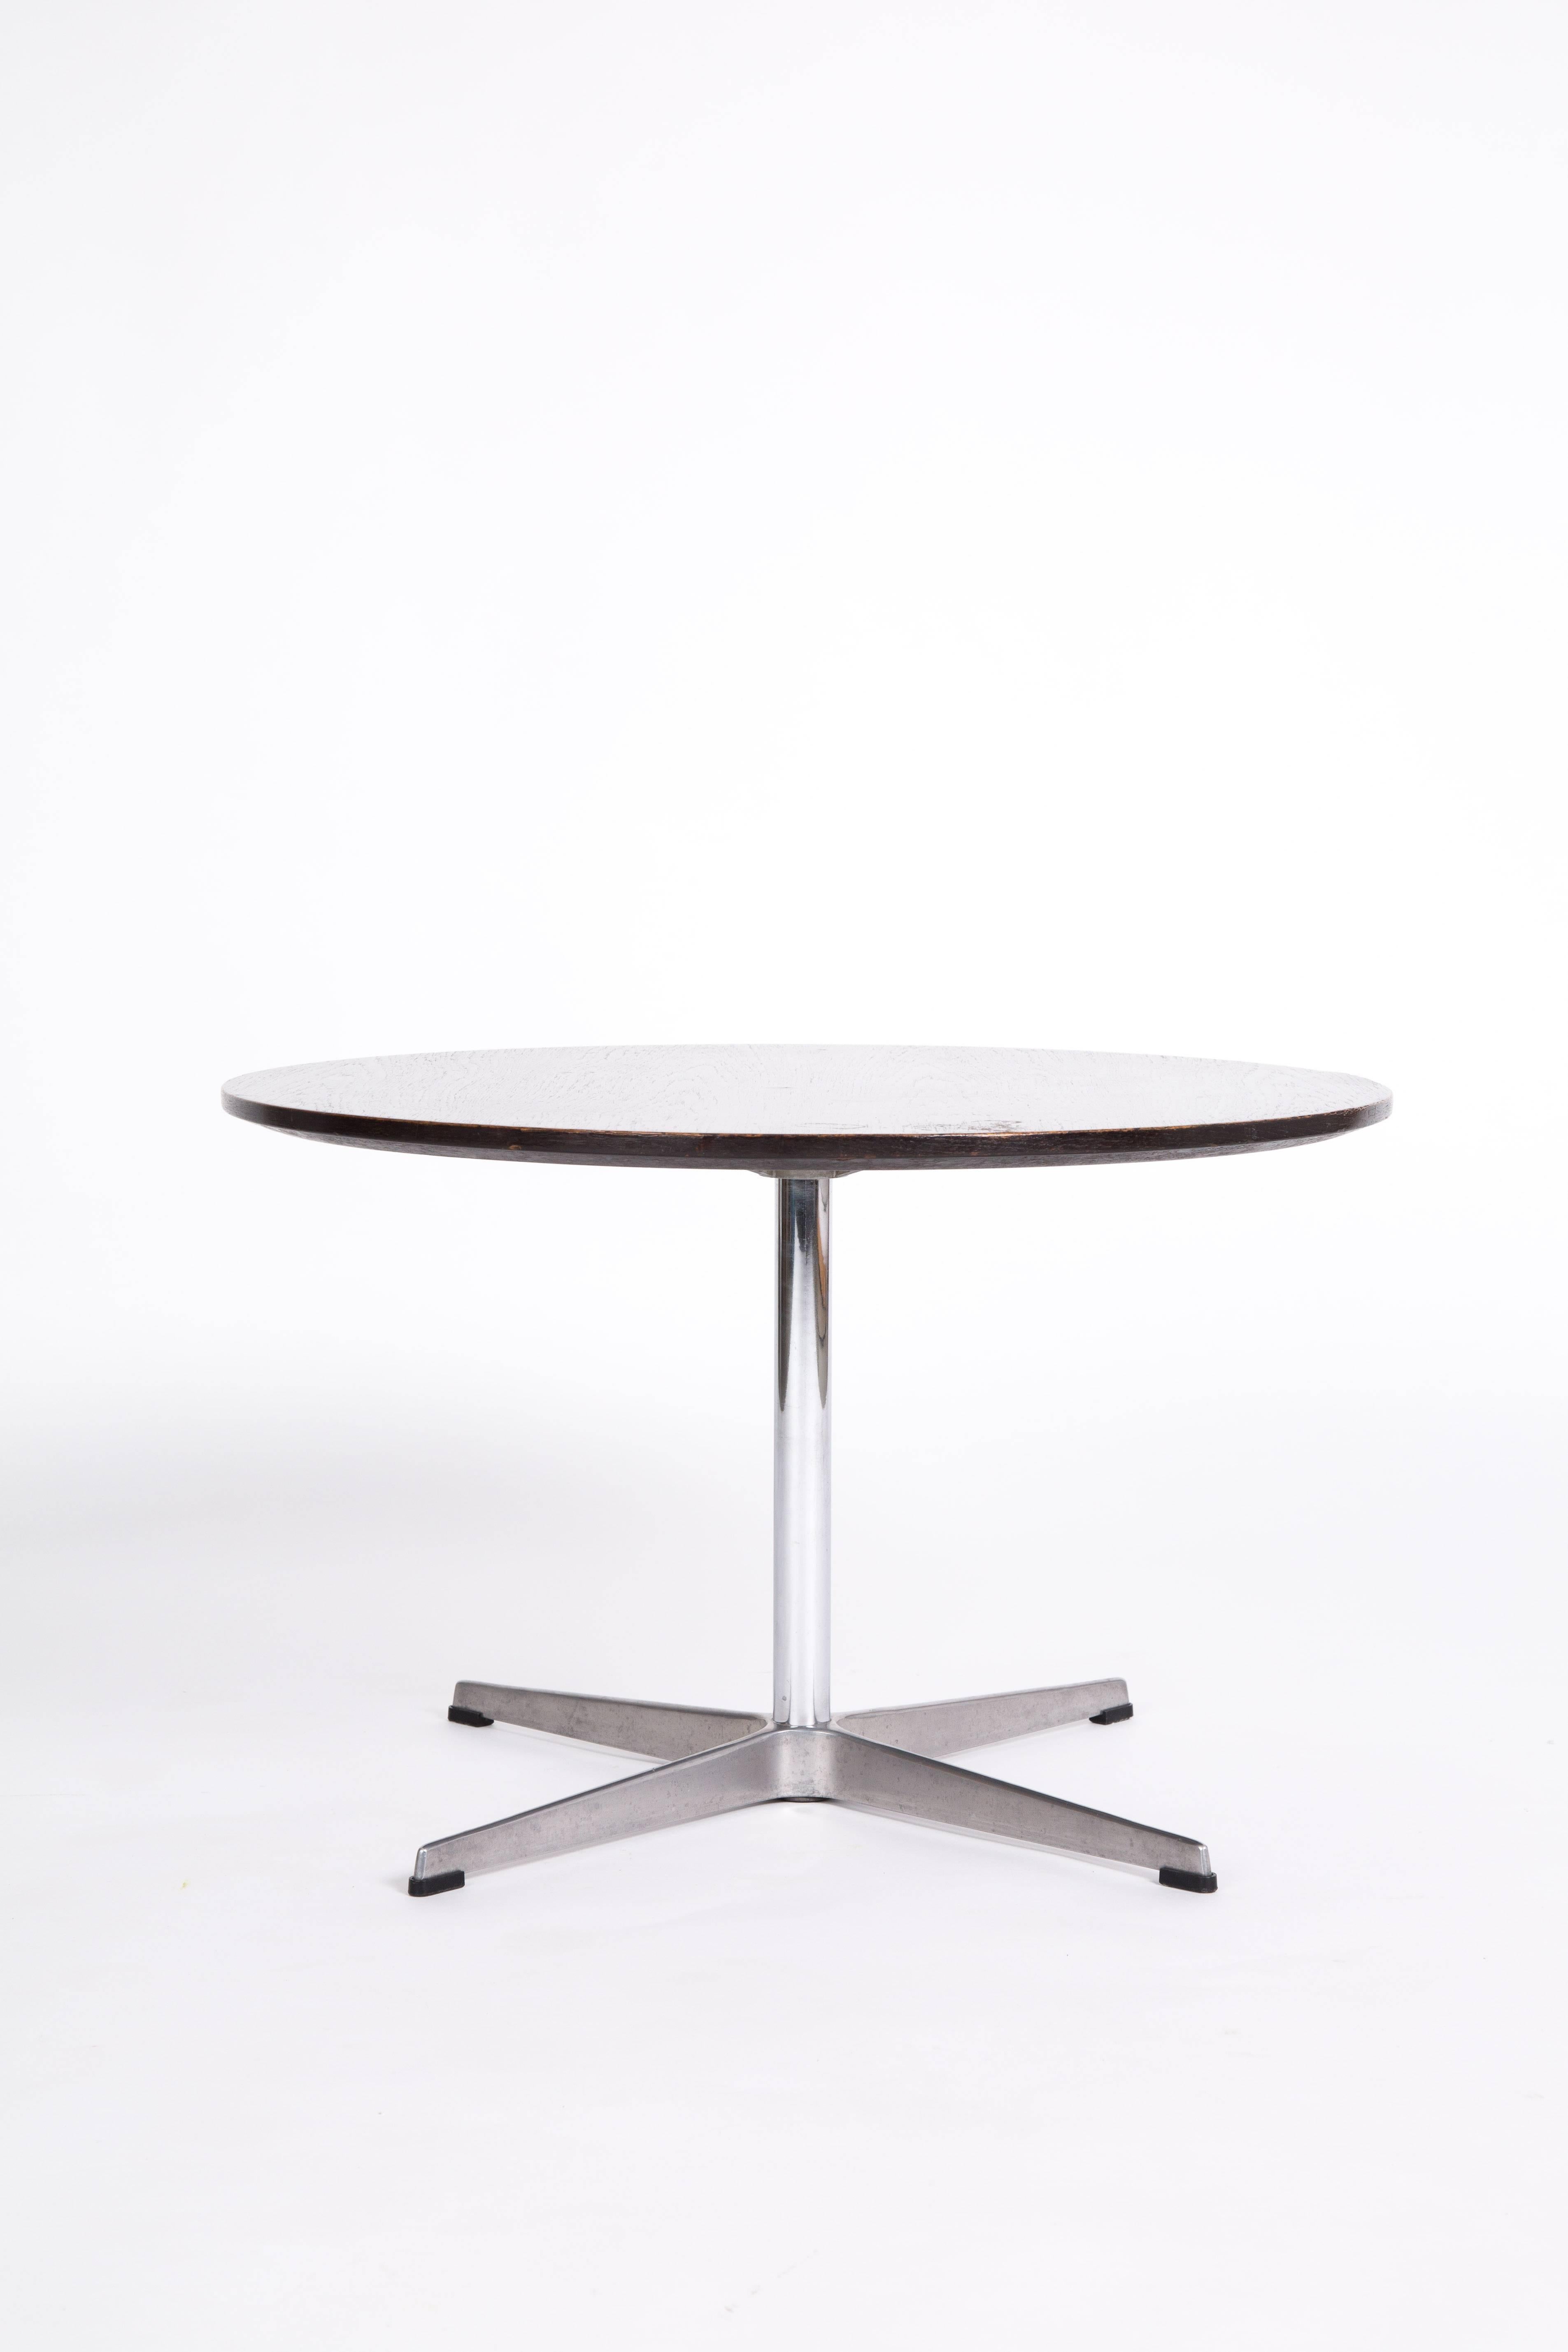 A round coffee table with a darkwood top. The round edge goes from small to thick. So the table looks thin, but the construction is stark by its thick centre. Very nice alumium base.